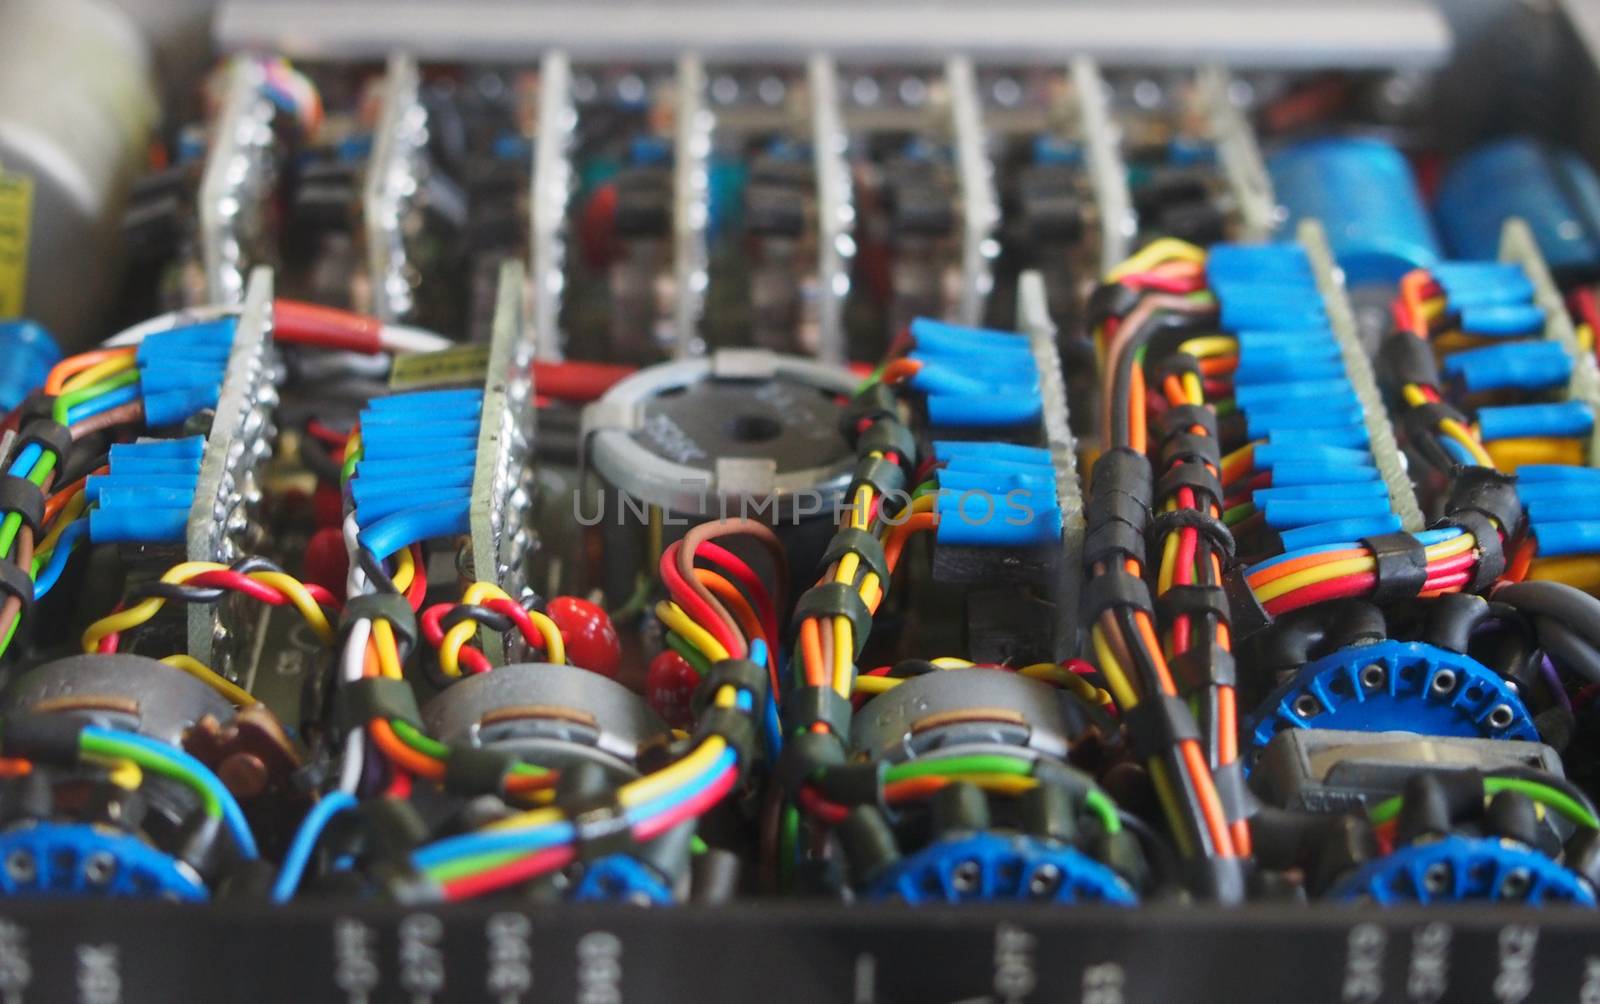 selective focus image of complex colored wiring and connectors joining circuit boards with electrical components